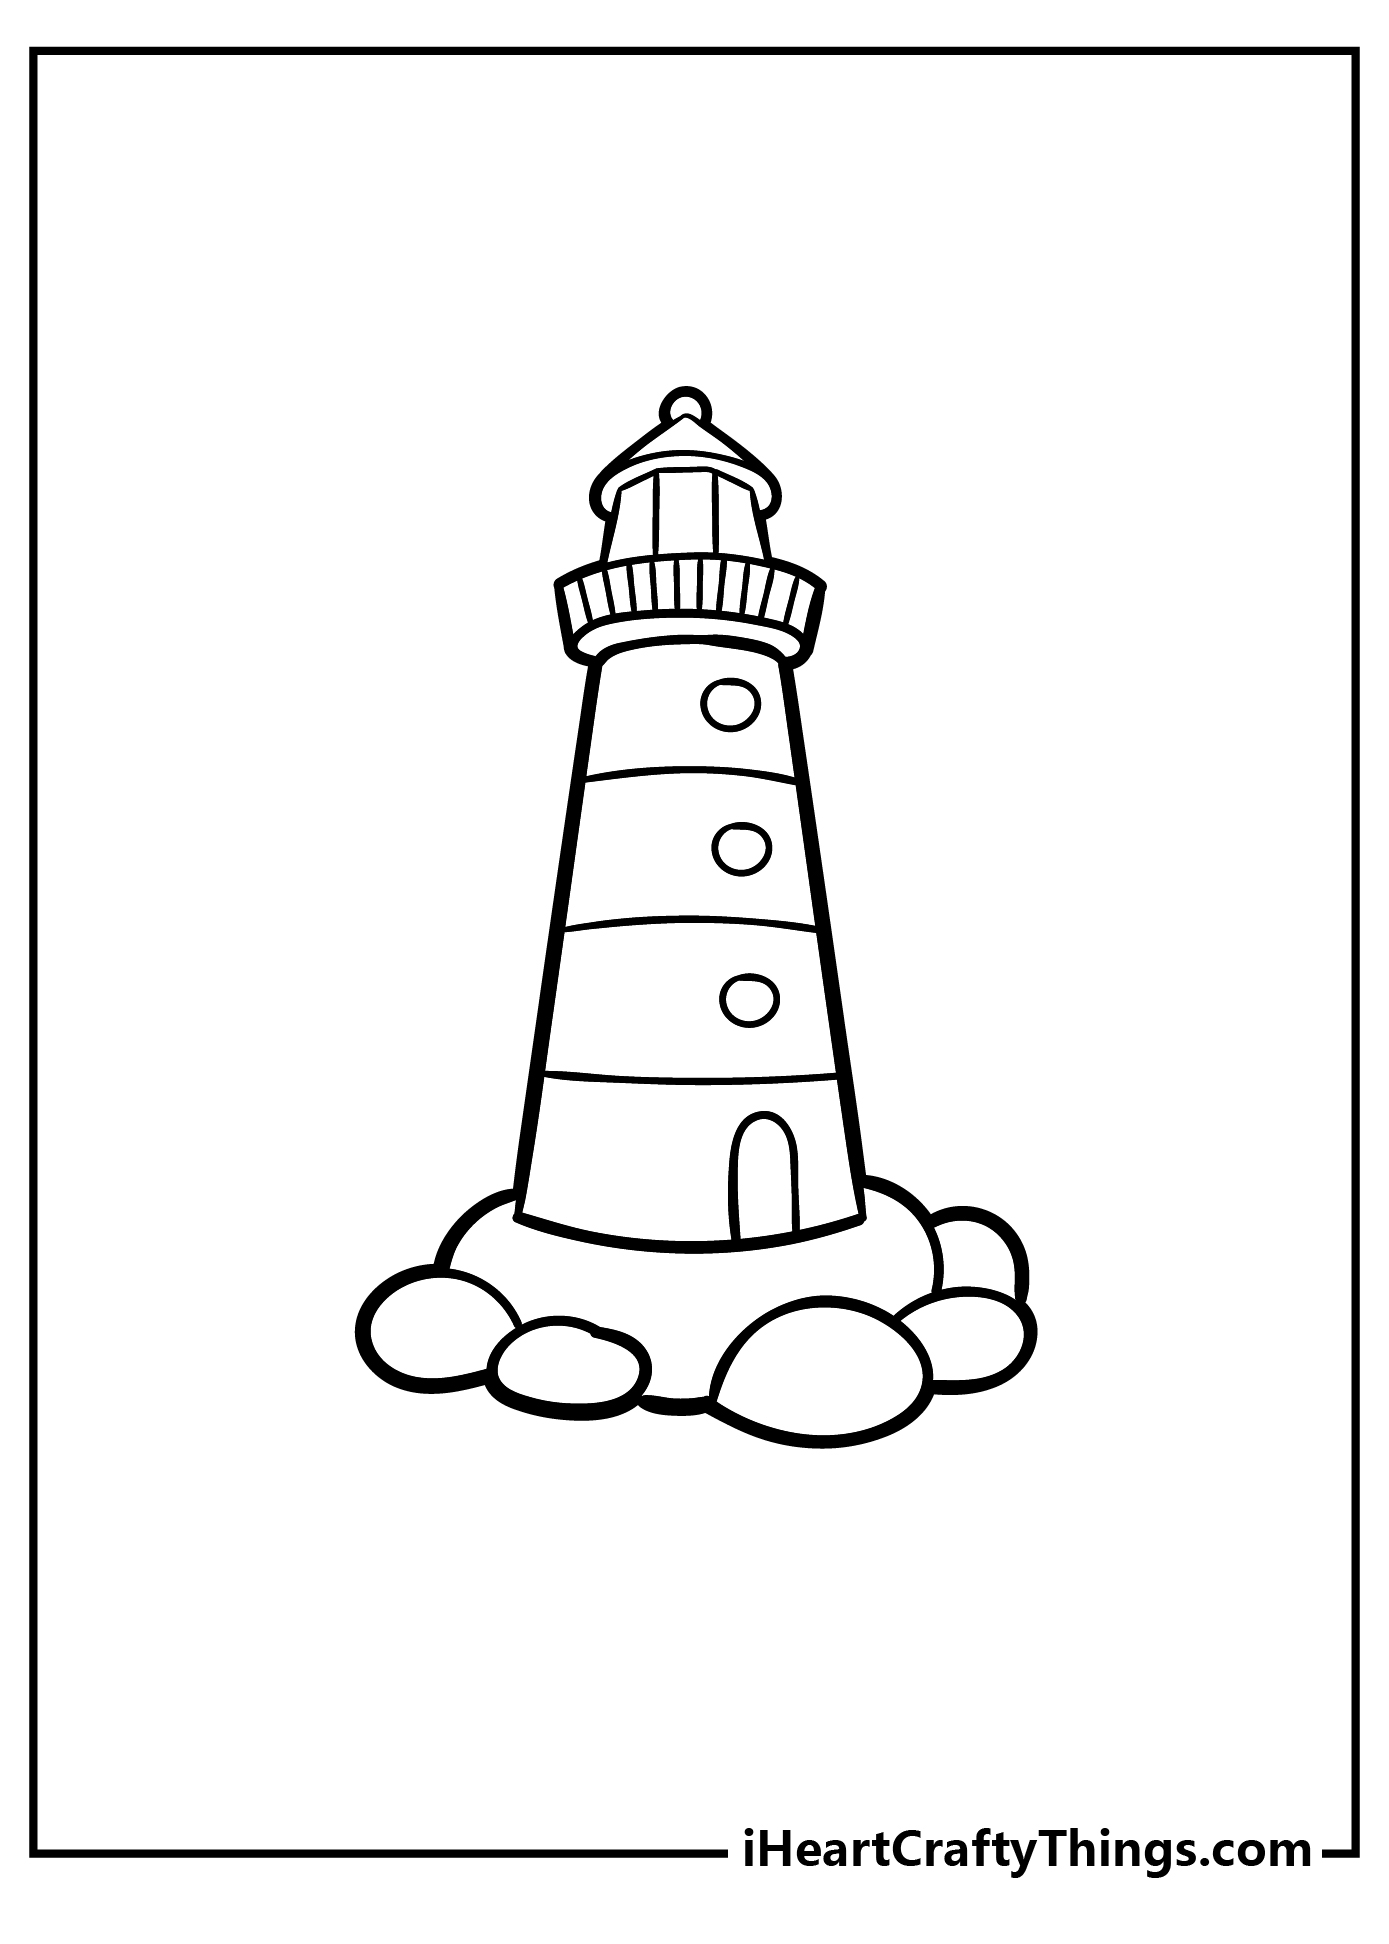 Lighthouse Coloring Sheet for children free download